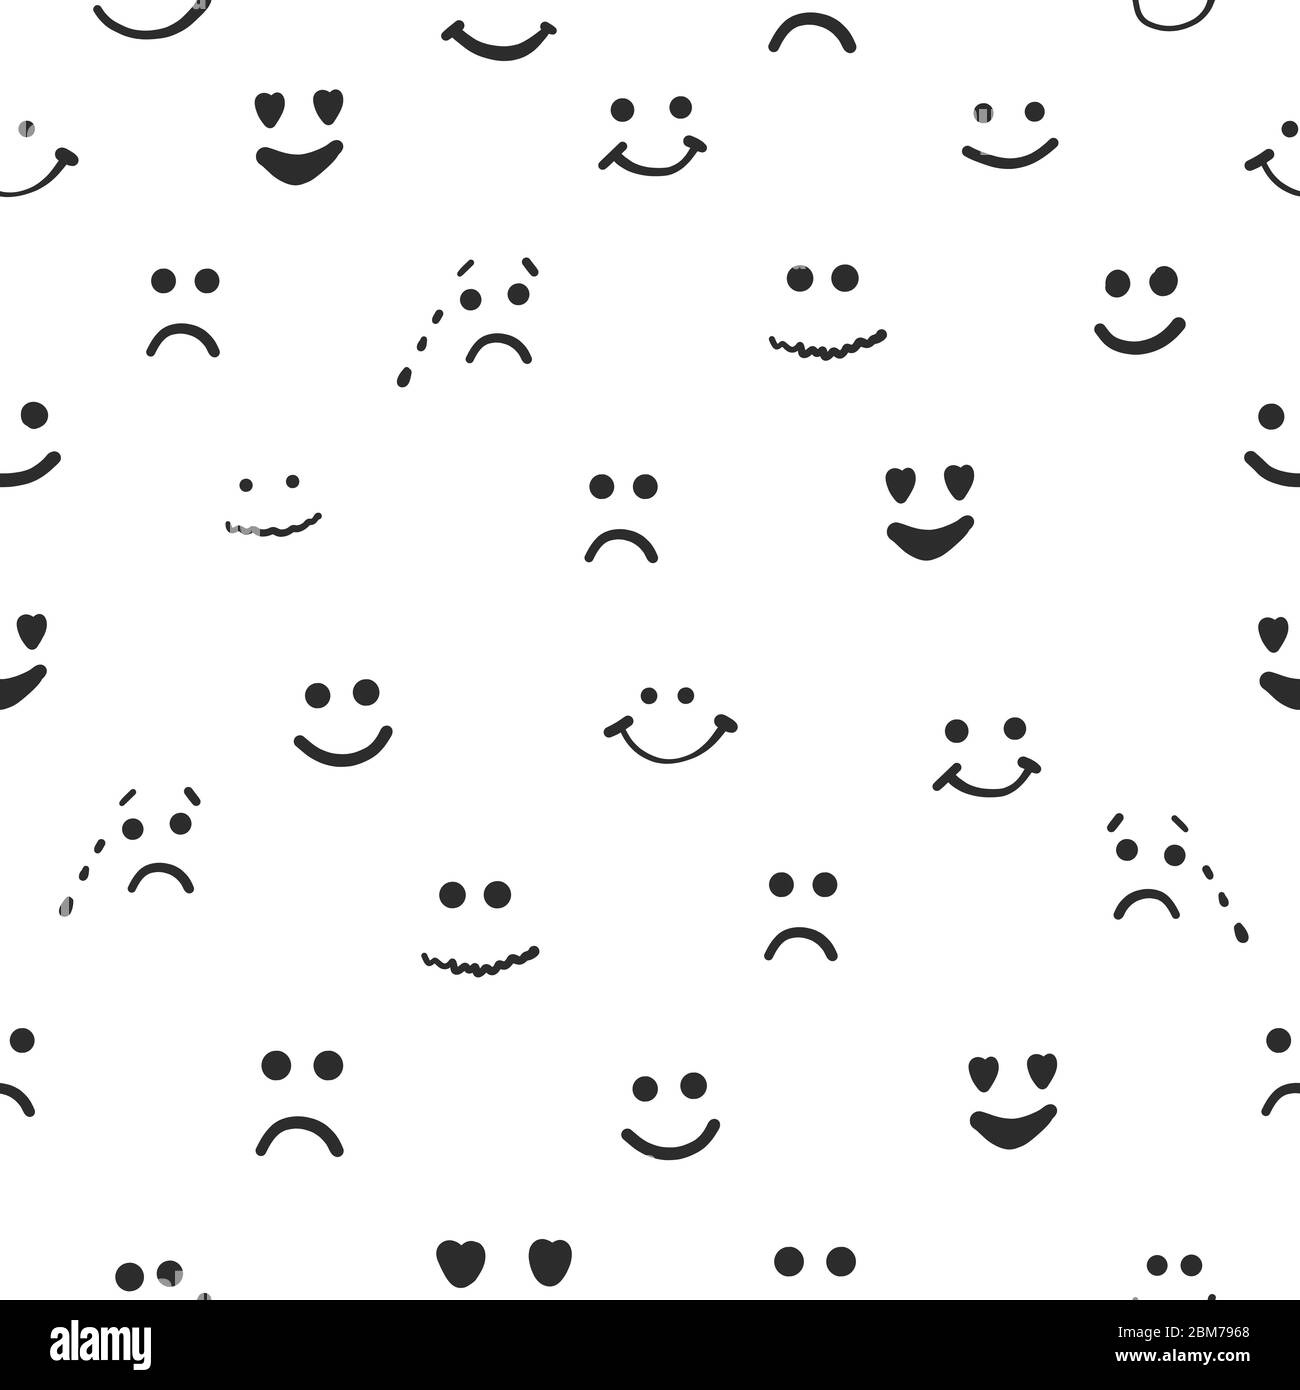 Sad face, happy face, smiley face, eyes heart face, crying face repeated pattern Stock Vector